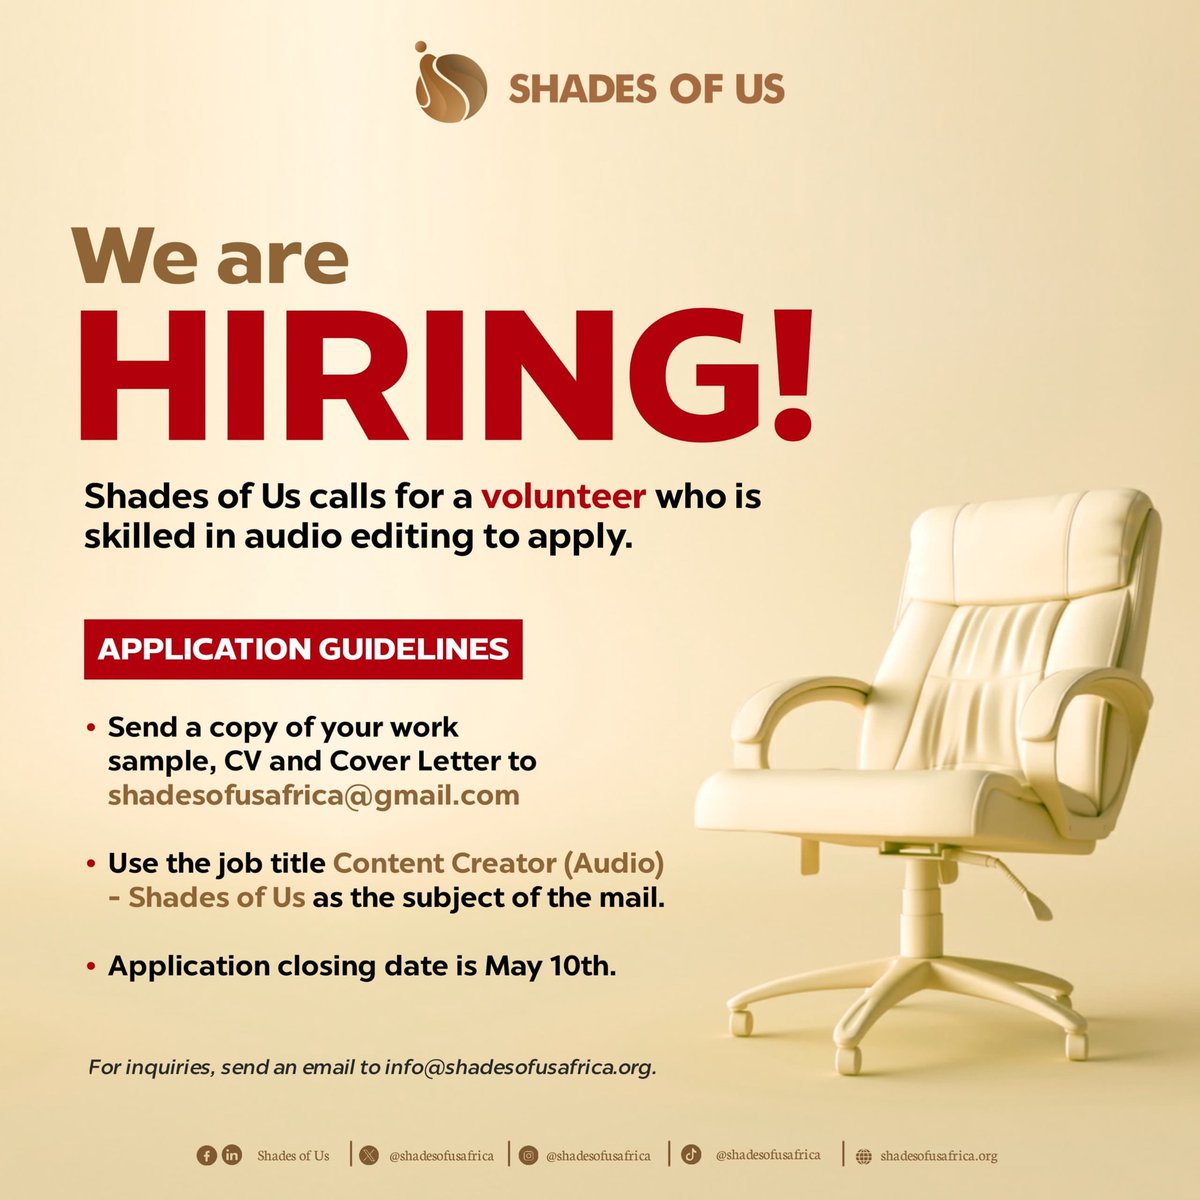 We are hiring! Job Title: Content Creator (Audio) – Shades of Us Location: Abuja (Hybrid – 75% Remote) Employment Type: Volunteer (20 Hours Per Week) Duration: 6 months Openings: One Apply for Our Content Creator (Audio) Volunteer Role here! shadesofus.co.uk/2024/04/apply-…